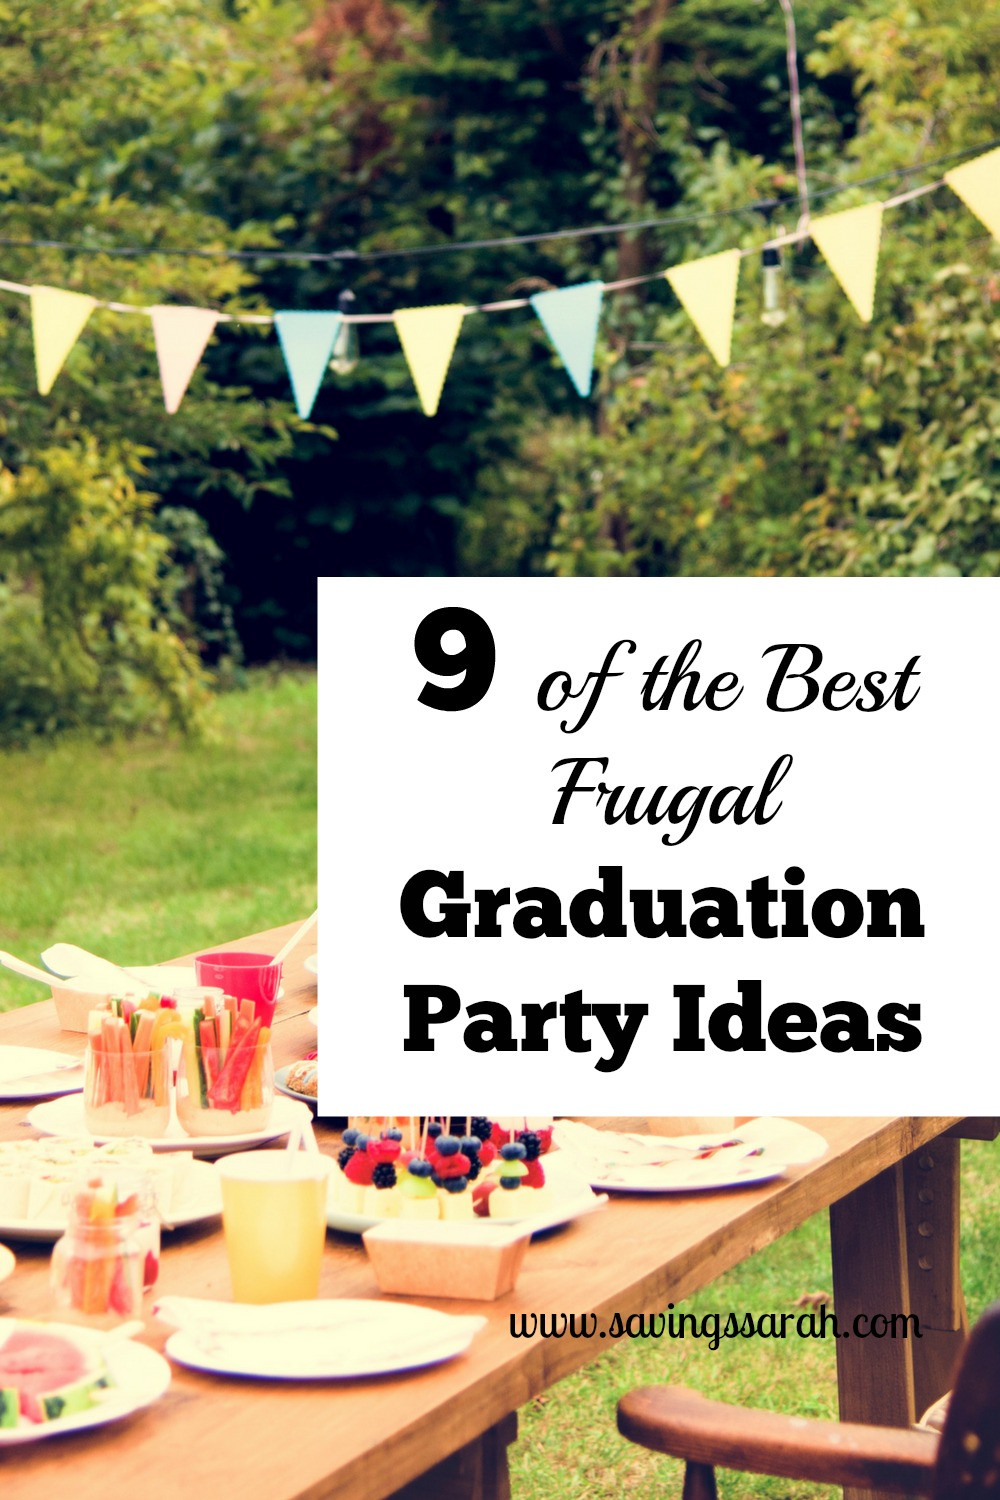 Graduation Party Advice Ideas
 9 the Best Frugal Graduation Party Ideas Earning and